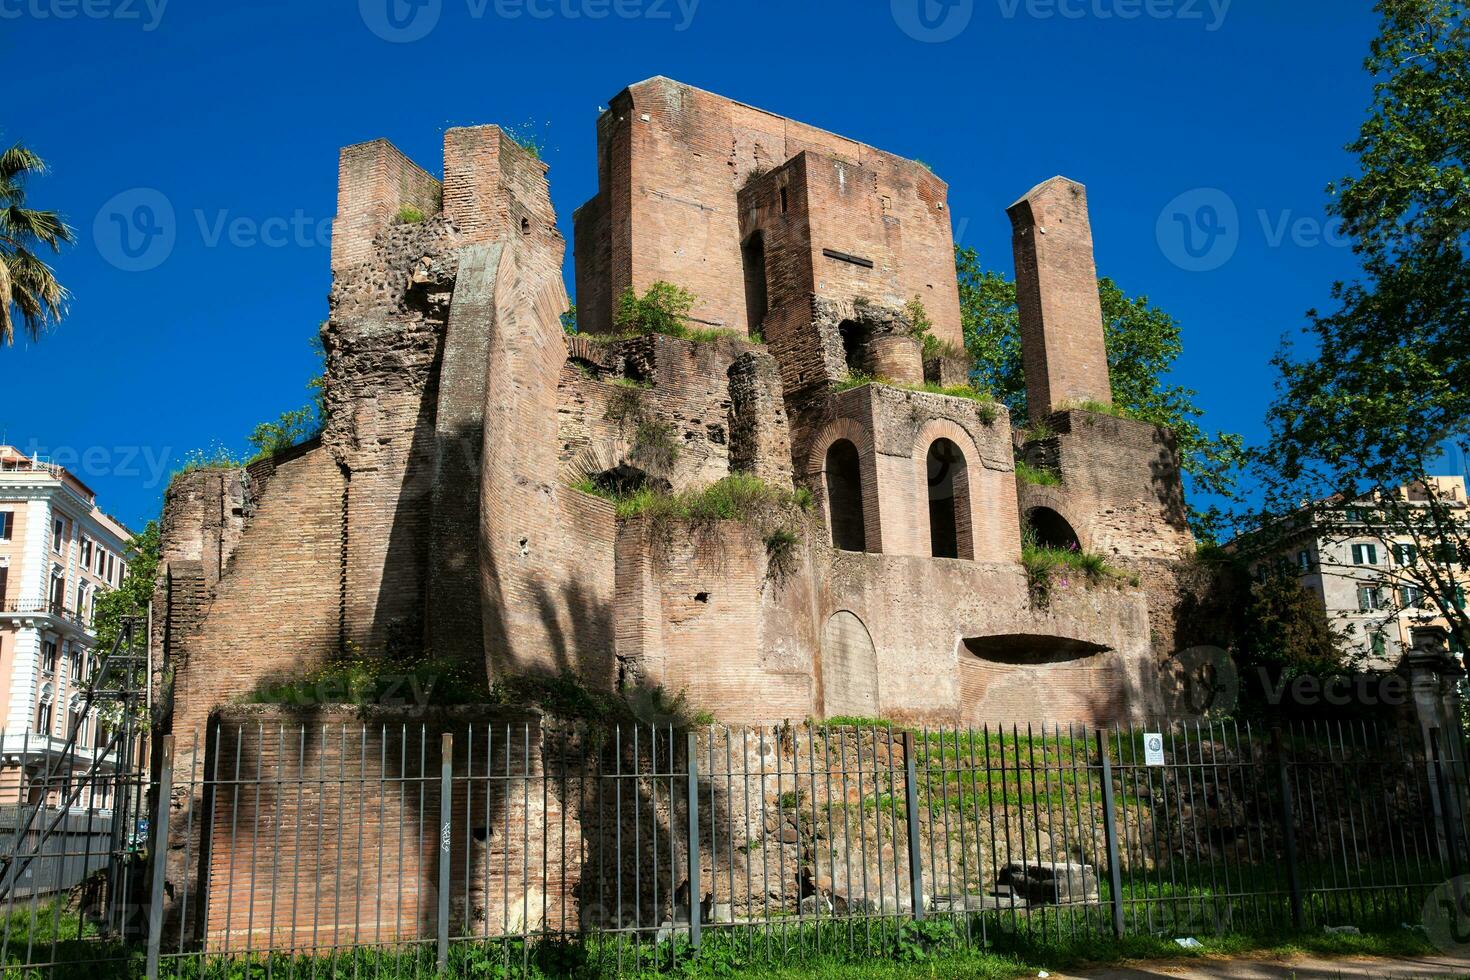 Ruins of an antique monumental fountain called Trofei di Mario built in 226 AD and  located at Piazza Vittorio Emanuele II in Rome photo